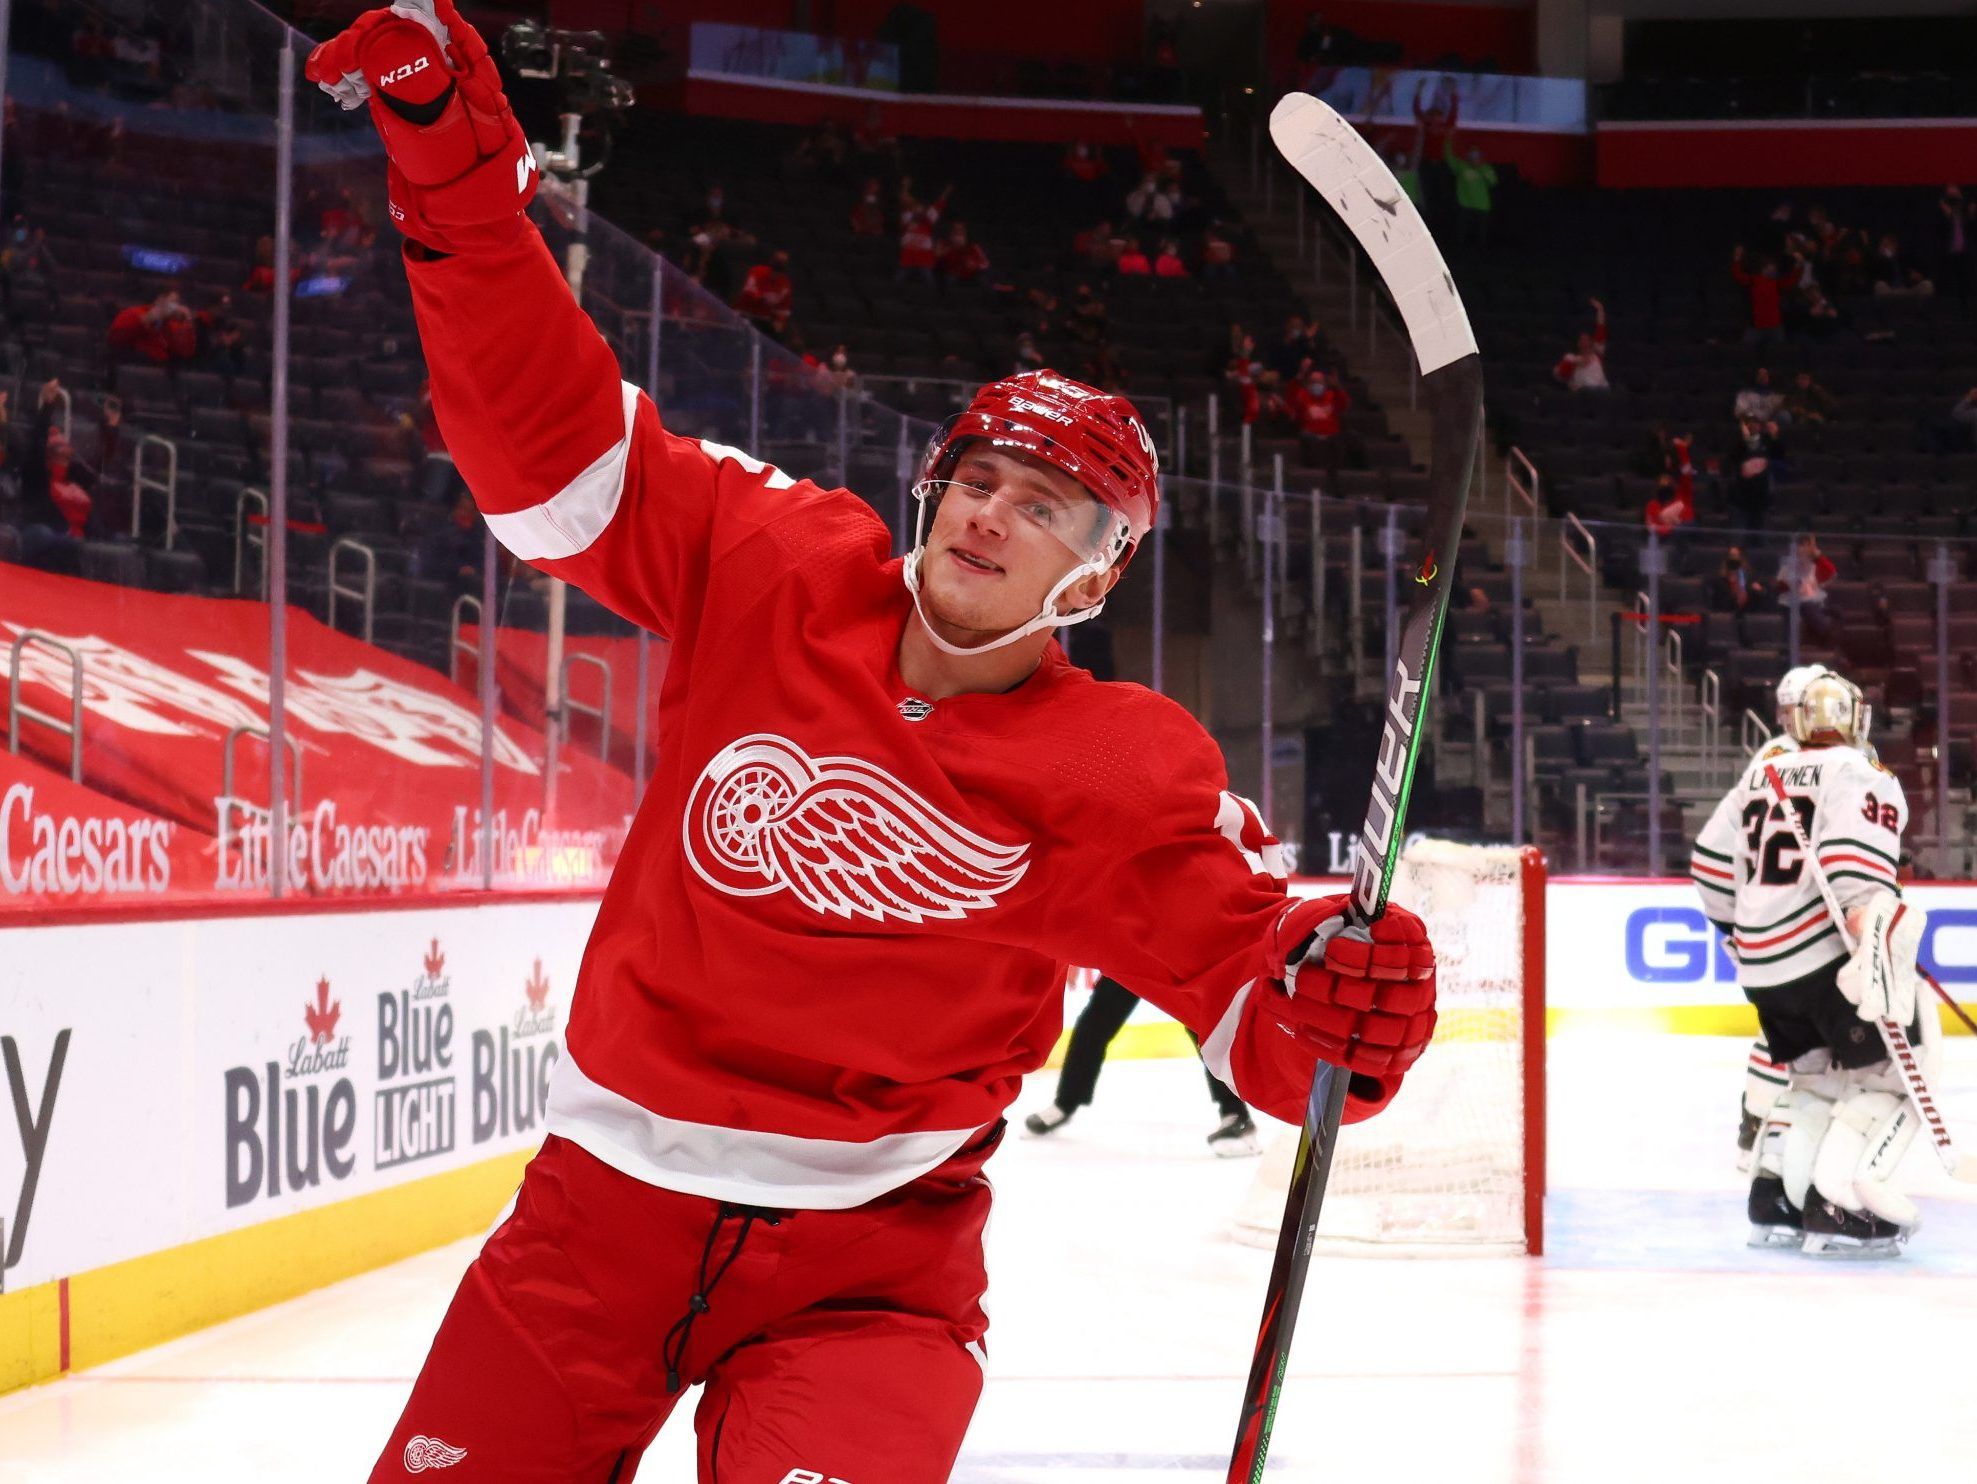 Luke Witkowski gets assist for Red Wings